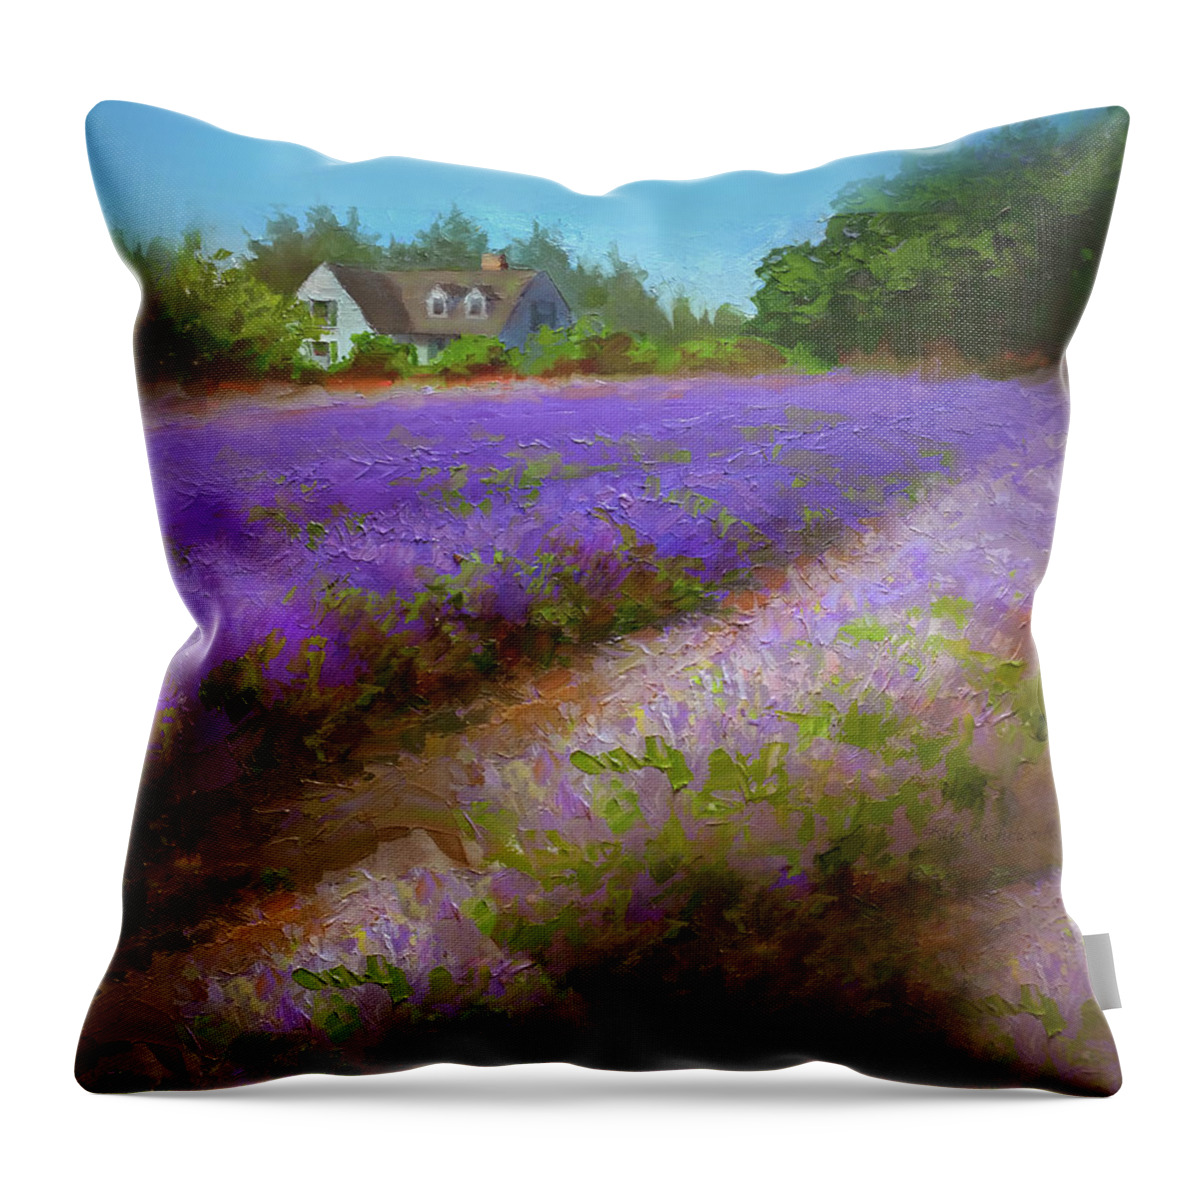 Oregon Art Throw Pillow featuring the painting Impressionistic Lavender Field Landscape Plein Air Painting by K Whitworth